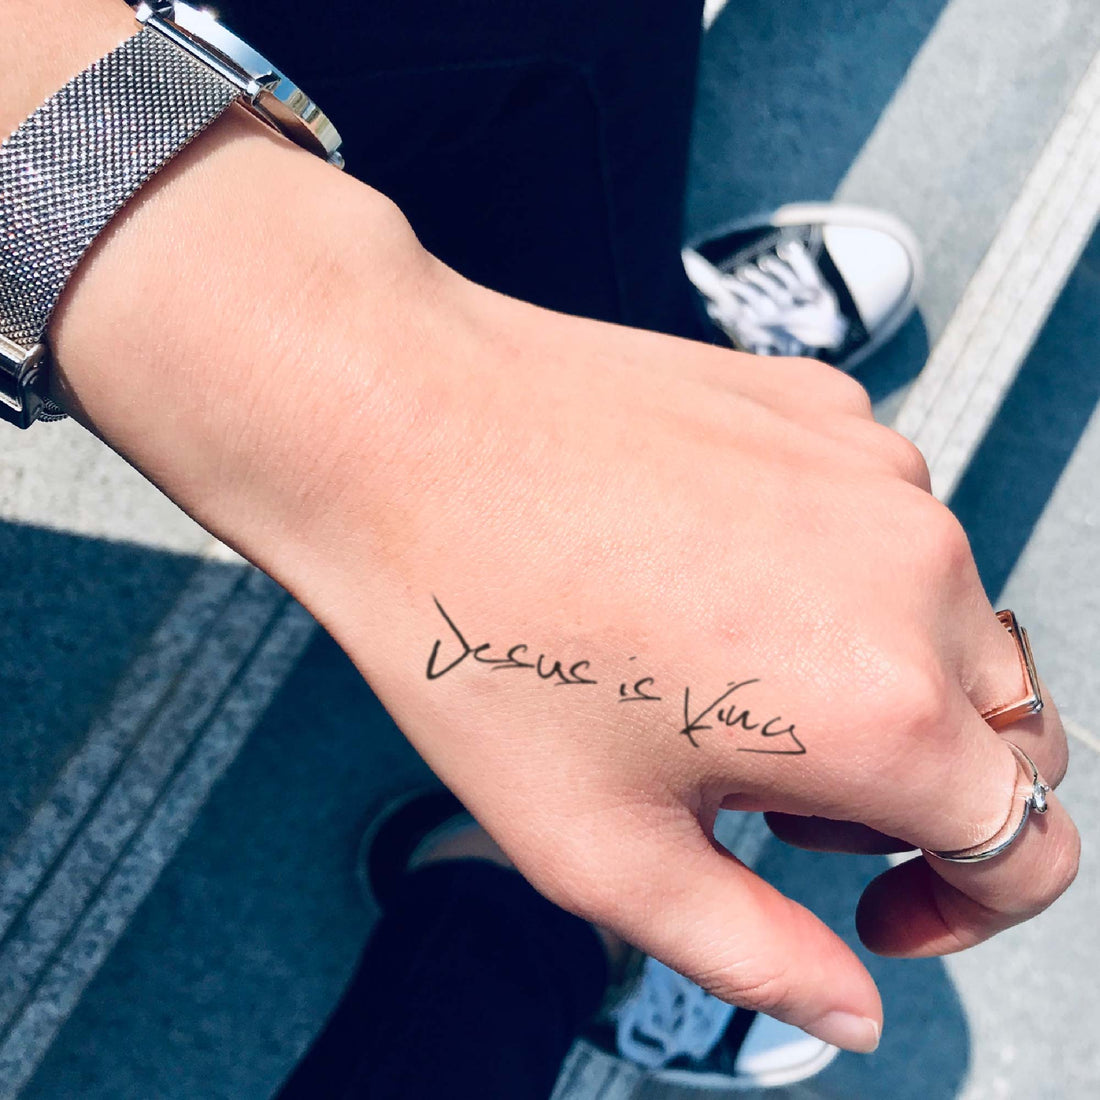 Jesus is King custom temporary tattoo sticker design idea inspiration meanings removal arm wrist hand words font name signature calligraphy lyrics tour concert outfits merch accessory gift souvenir costumes wear dress up code